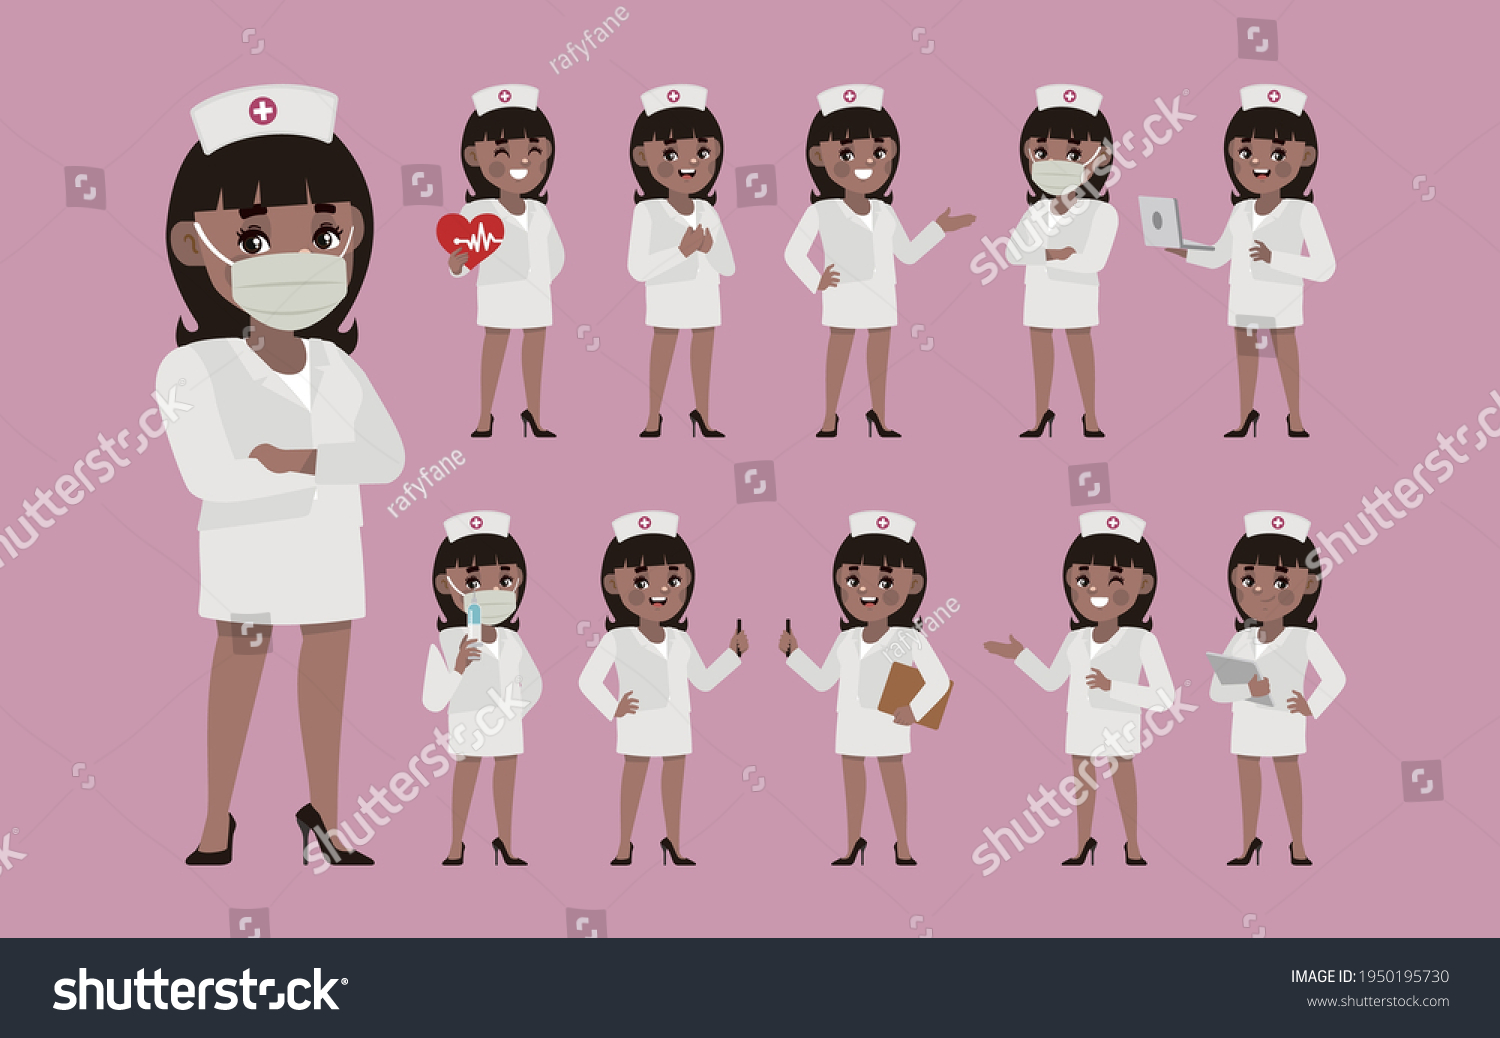 Set Nurse Different Poses Stock Vector Royalty Free 1950195730 Shutterstock